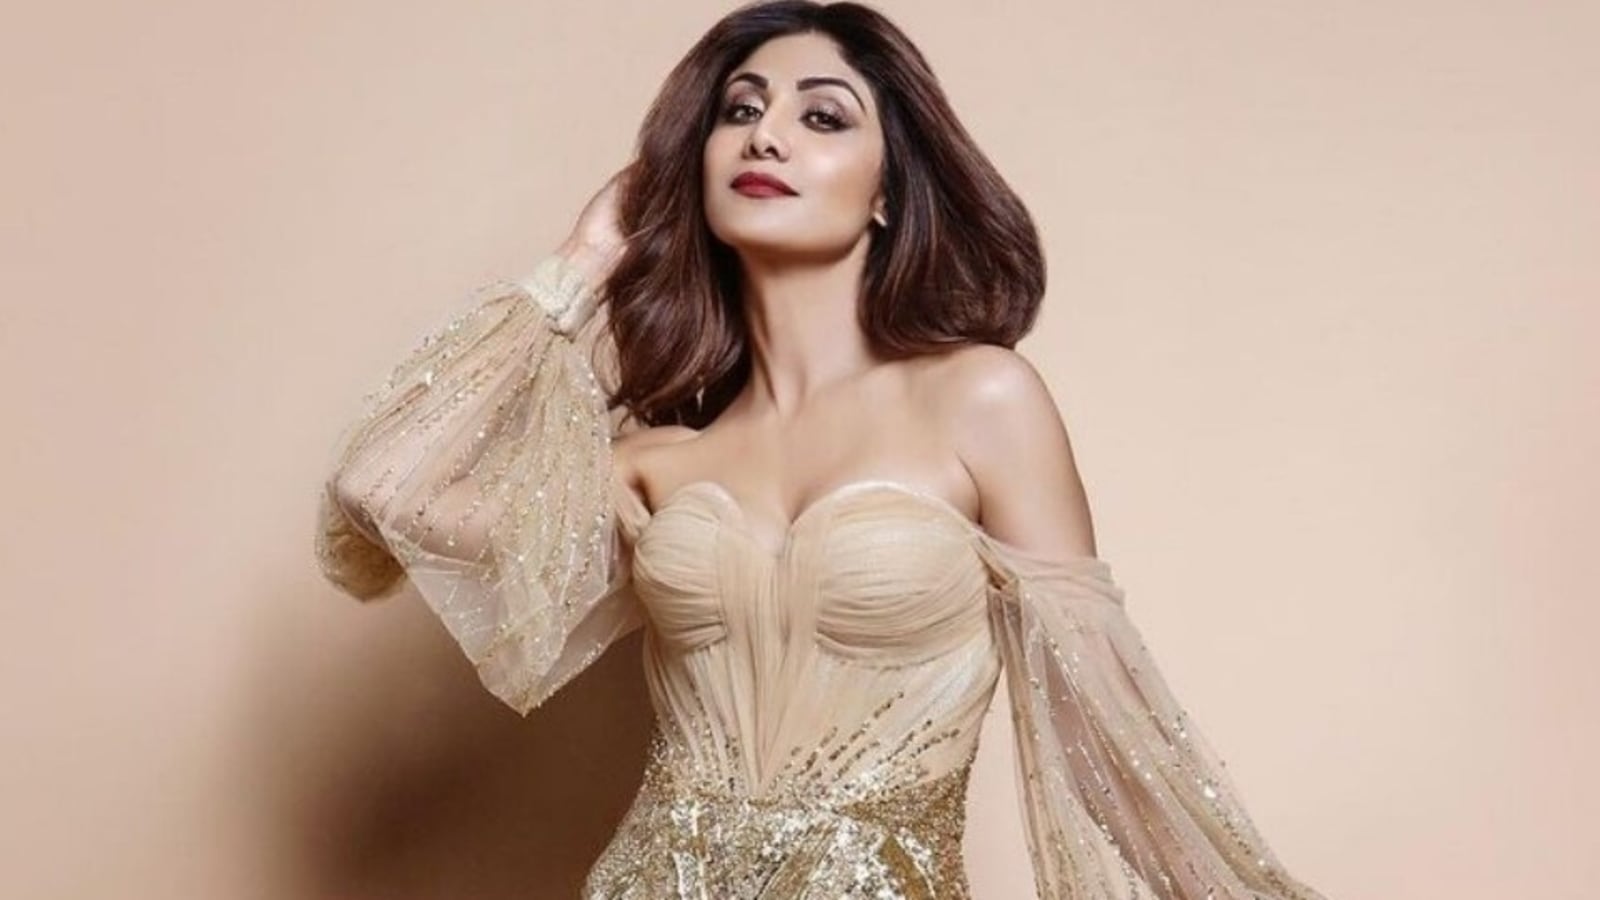 Shilpa Shetty Ki Nangi Sexy Pic - Sparkle on, darling: Shilpa Shetty in nude shimmery gown gives us a  retro-chic moment | Fashion Trends - Hindustan Times